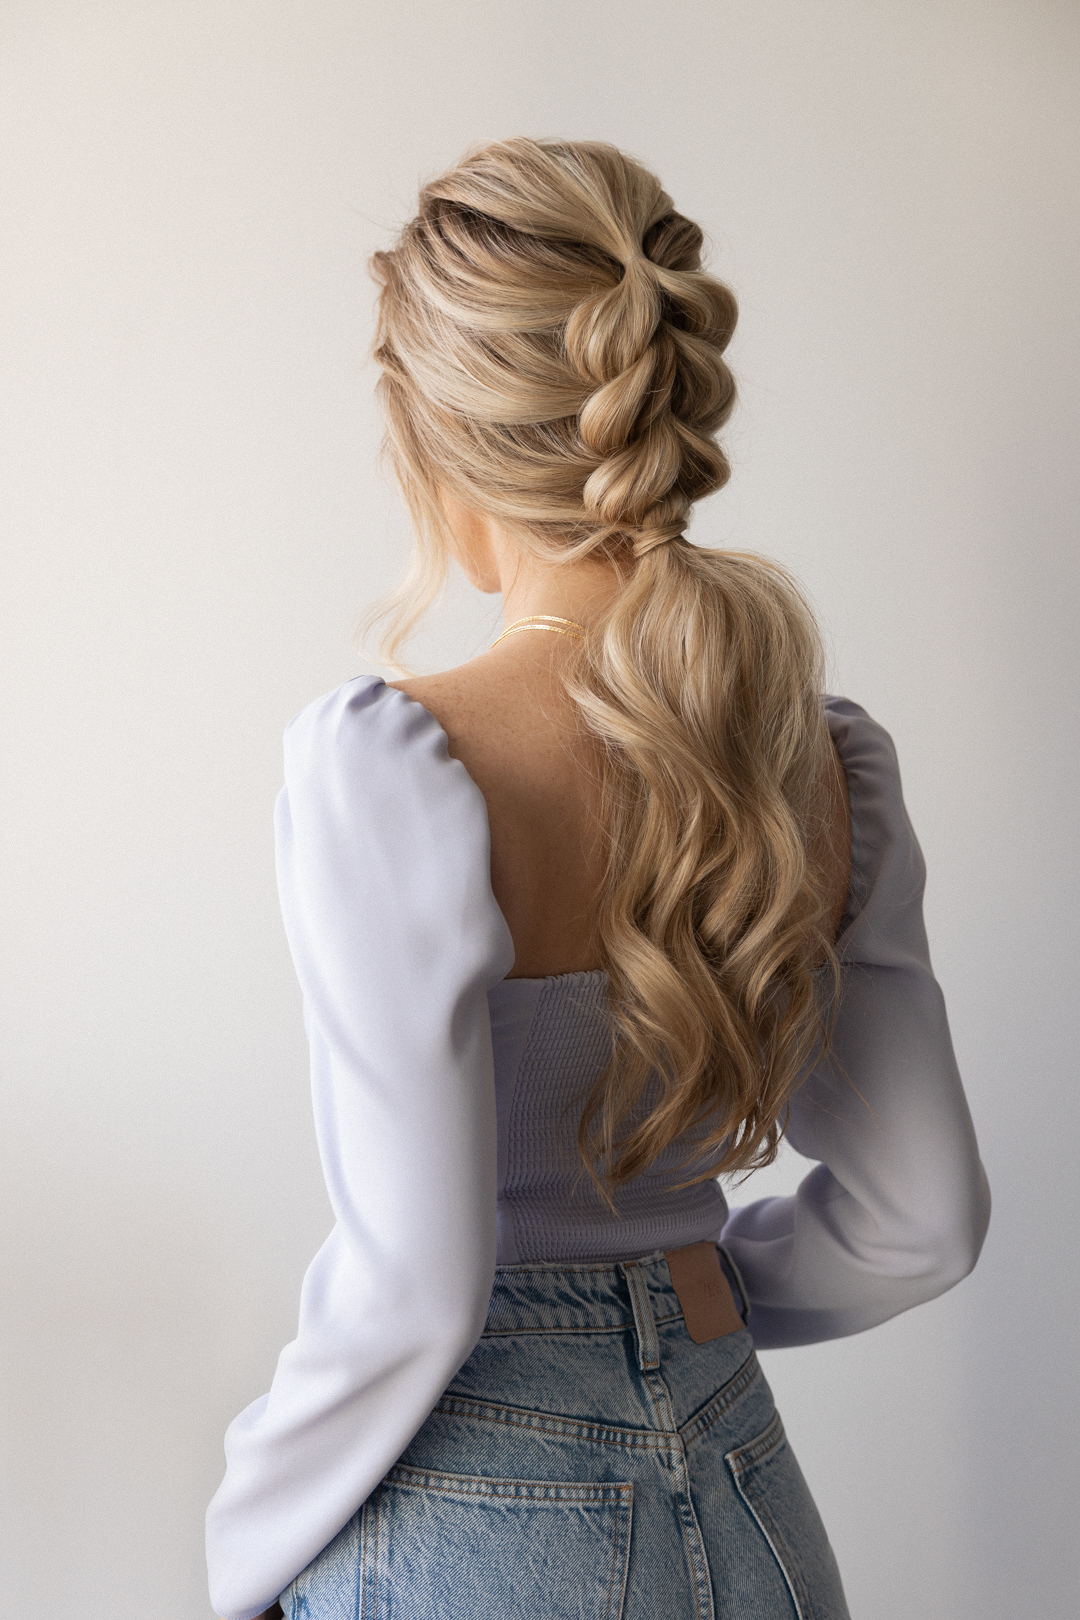 beautiful bridal hairstyle idea on blonde hair. braided on top and low ponytail, with soft waves and loose strands around the face